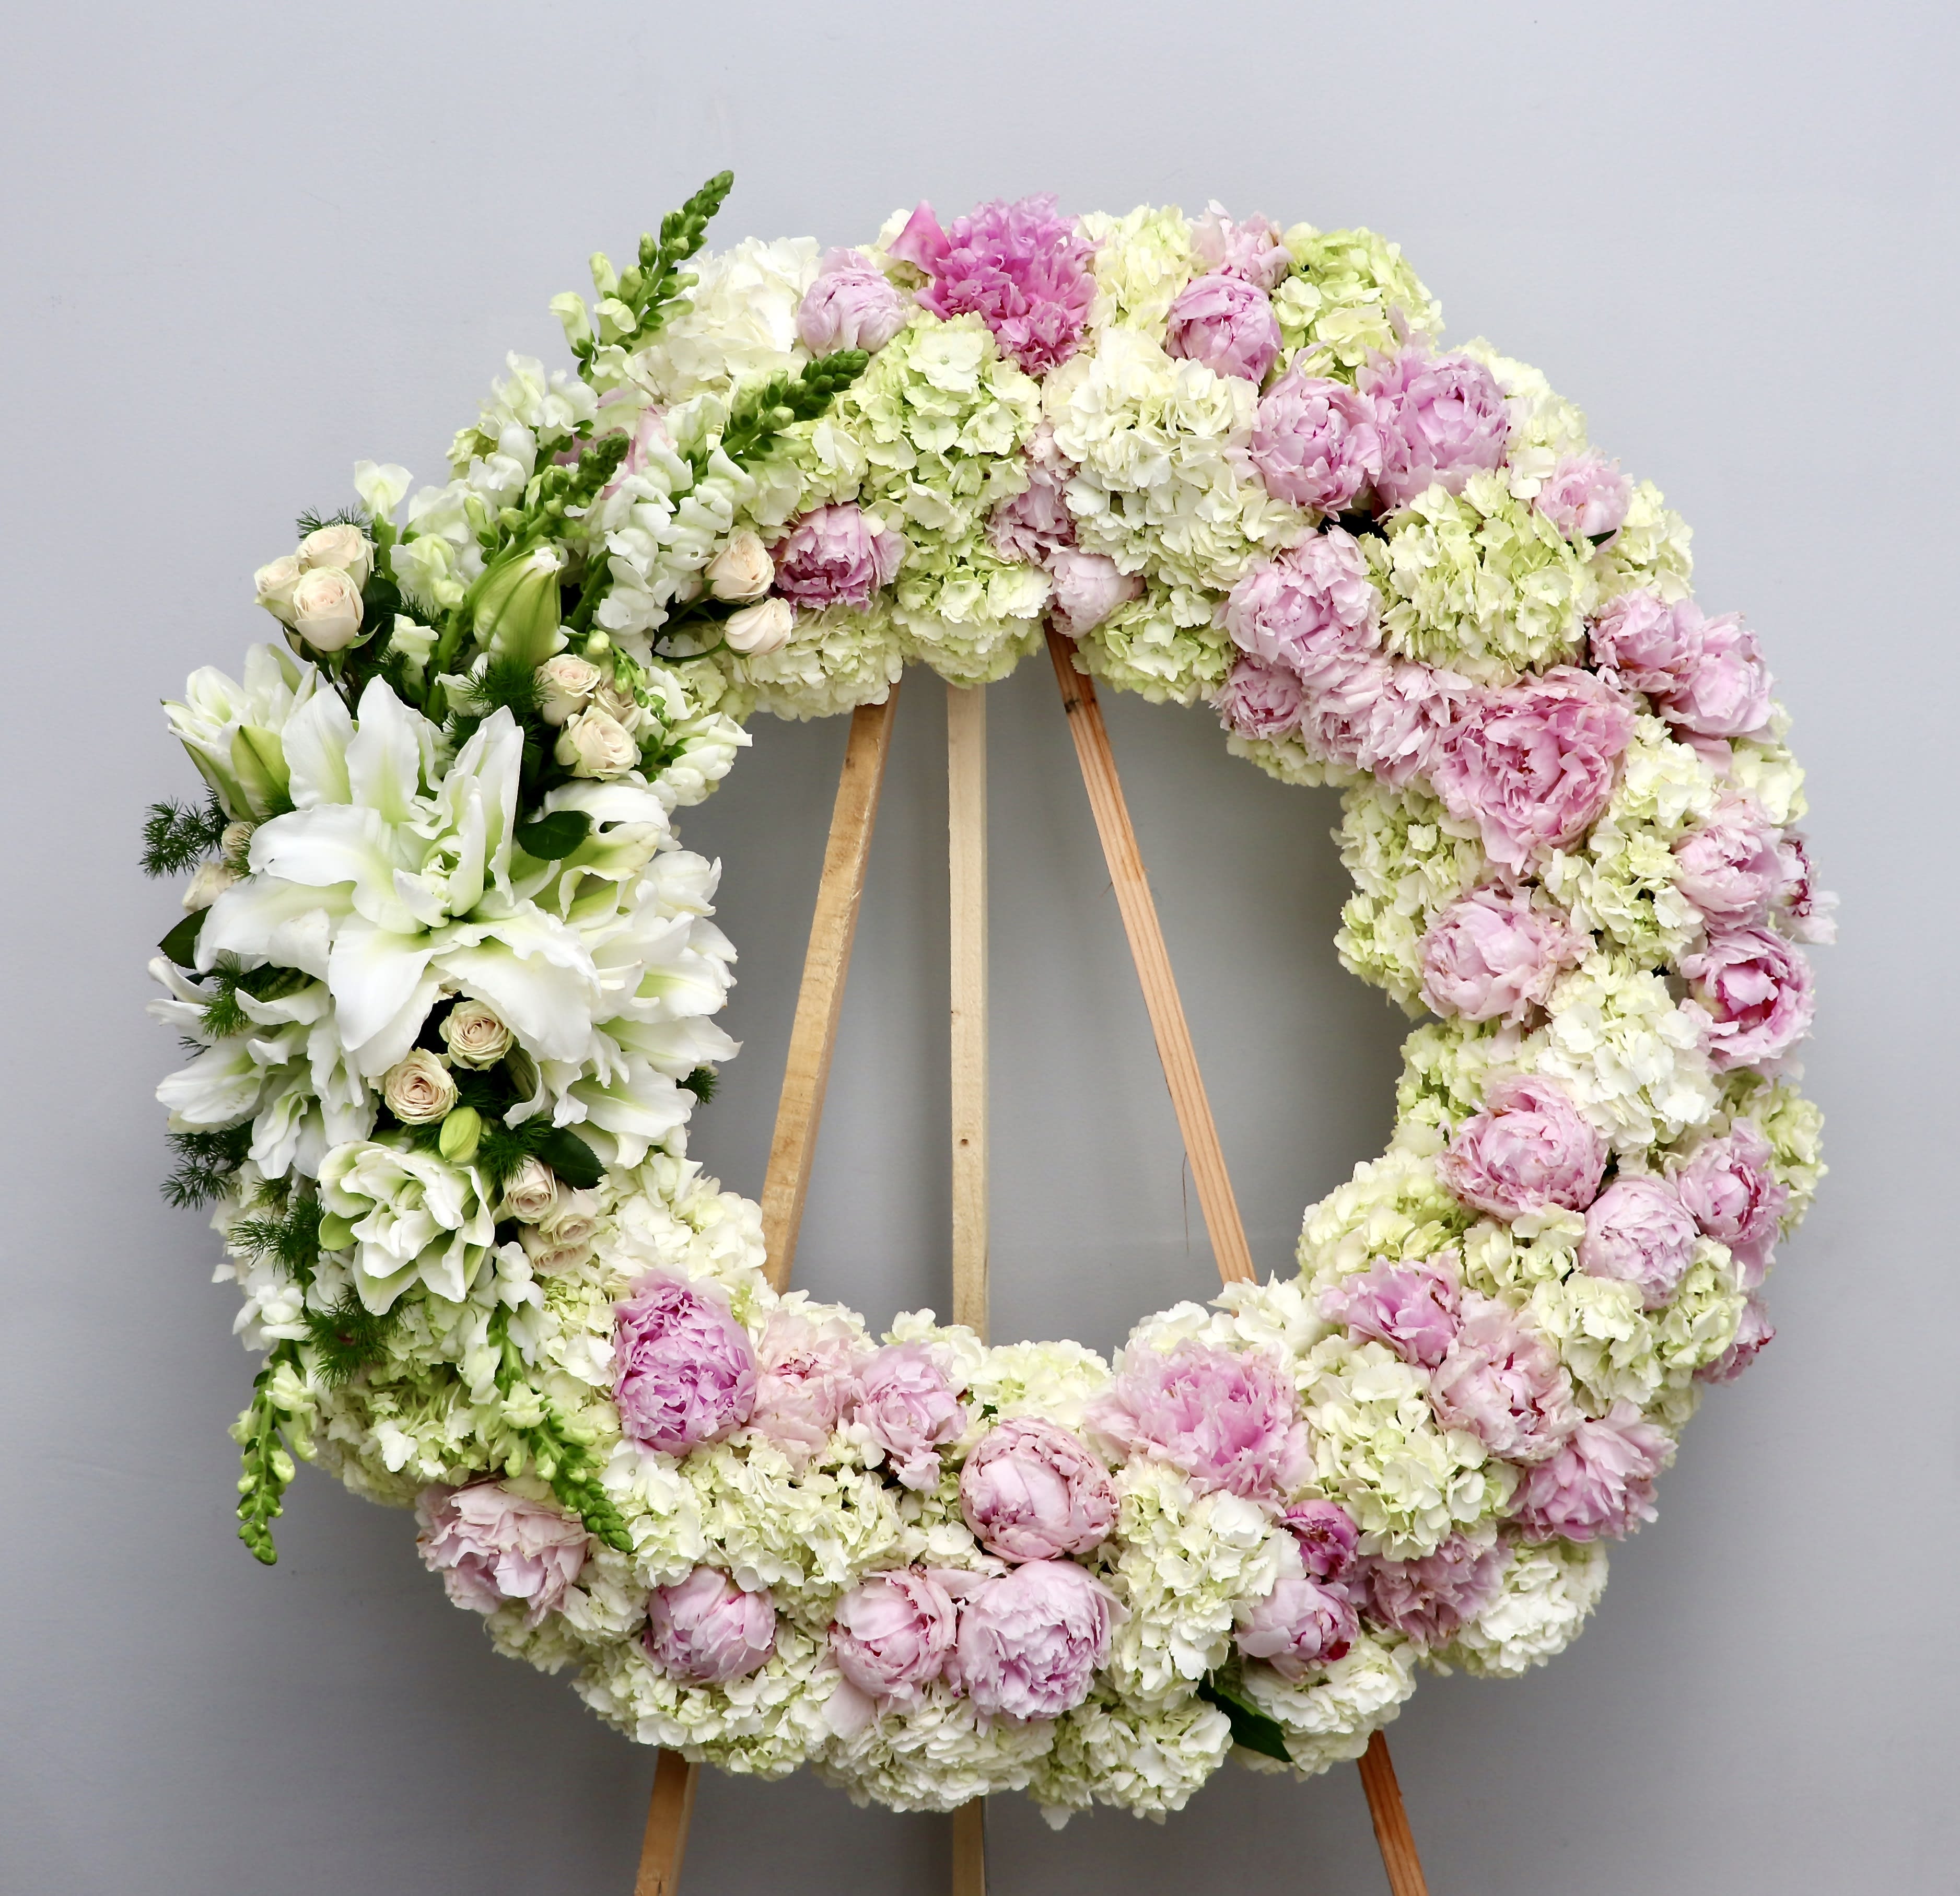 Peony and Hydrangea Wreath - With a mix of blush peony (garden roses when not in season) and hydrangeas, this sympathy wreath also contains snapdragons and lilies.   We include easel, printed banner and delivery (some fees may apply).  Standard size is 30'', deluxe is 36'', and premium is 42''.